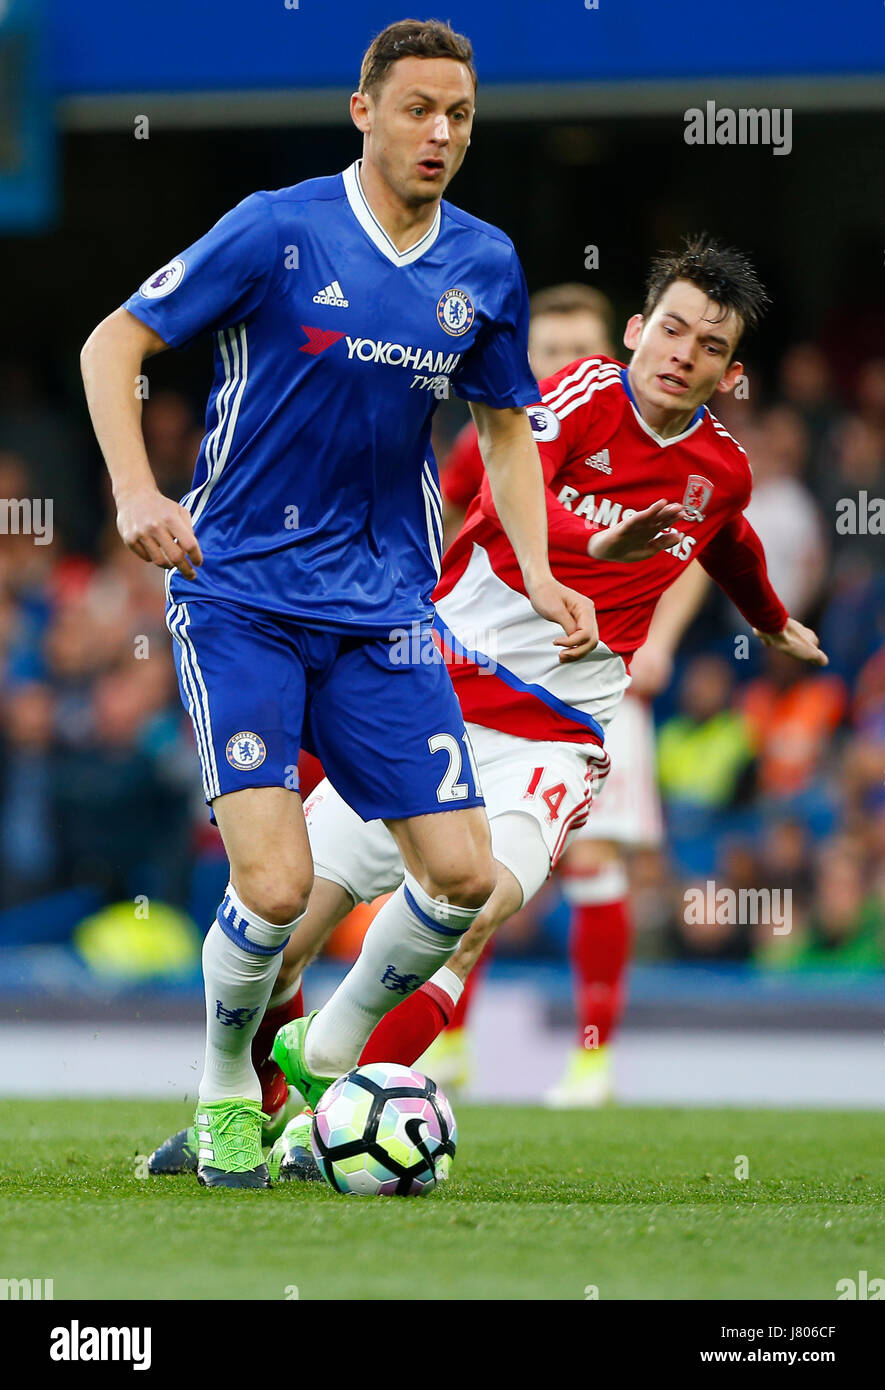 Nemanja Matic of Chelsea during the Premier League match between Chelsea and Middlesborough at Stamford Bridge in London. 07 May 2017 EDITORIAL USE ONLY  No merchandising. For Football images FA and Premier League restrictions apply inc. no internet/mobile usage without FAPL license - for details contact Football Dataco Stock Photo